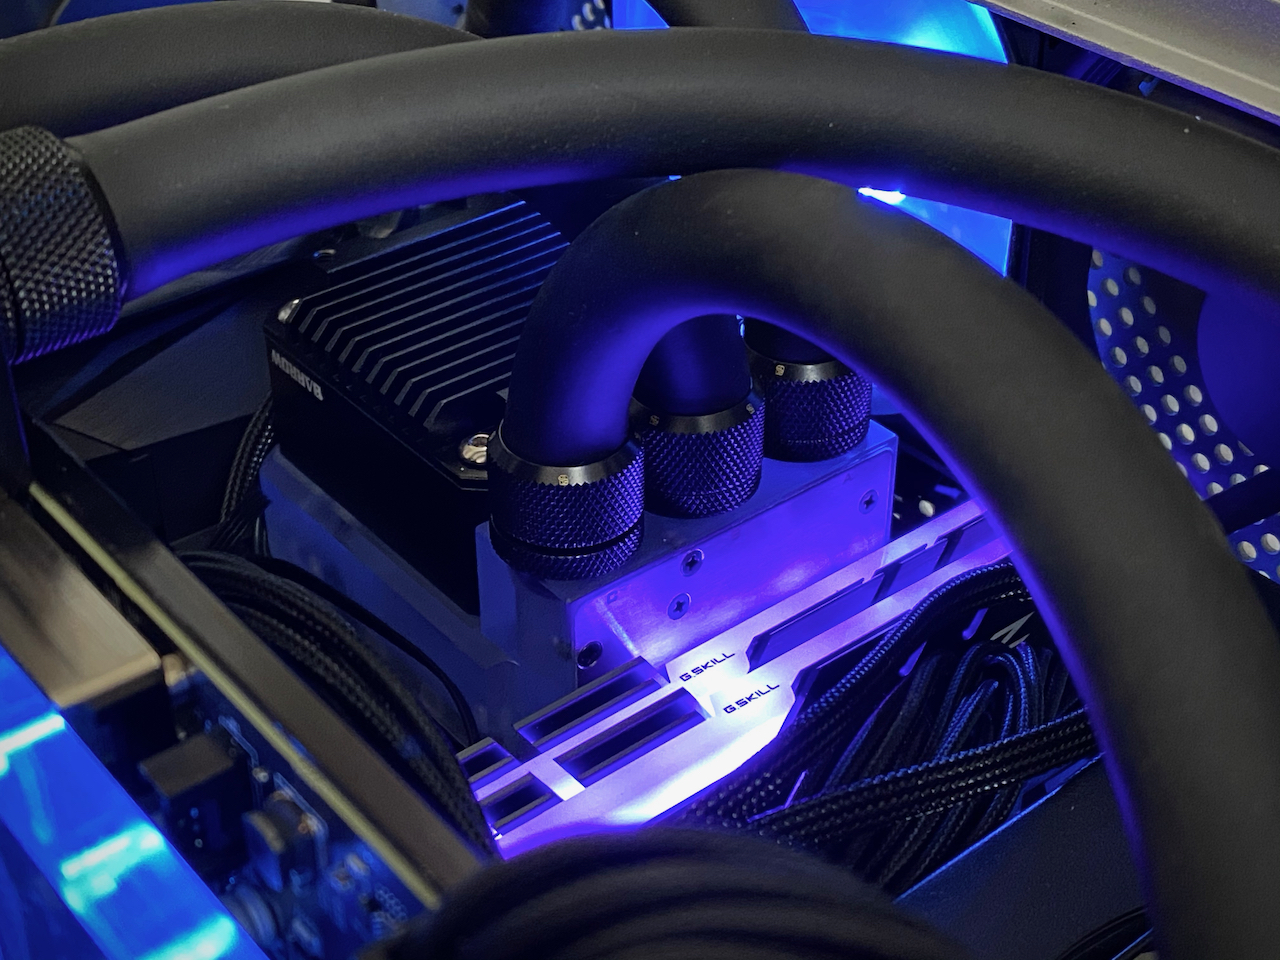 Close up picture of the pump block in the running computer. Blue and purple lights glowing around it.